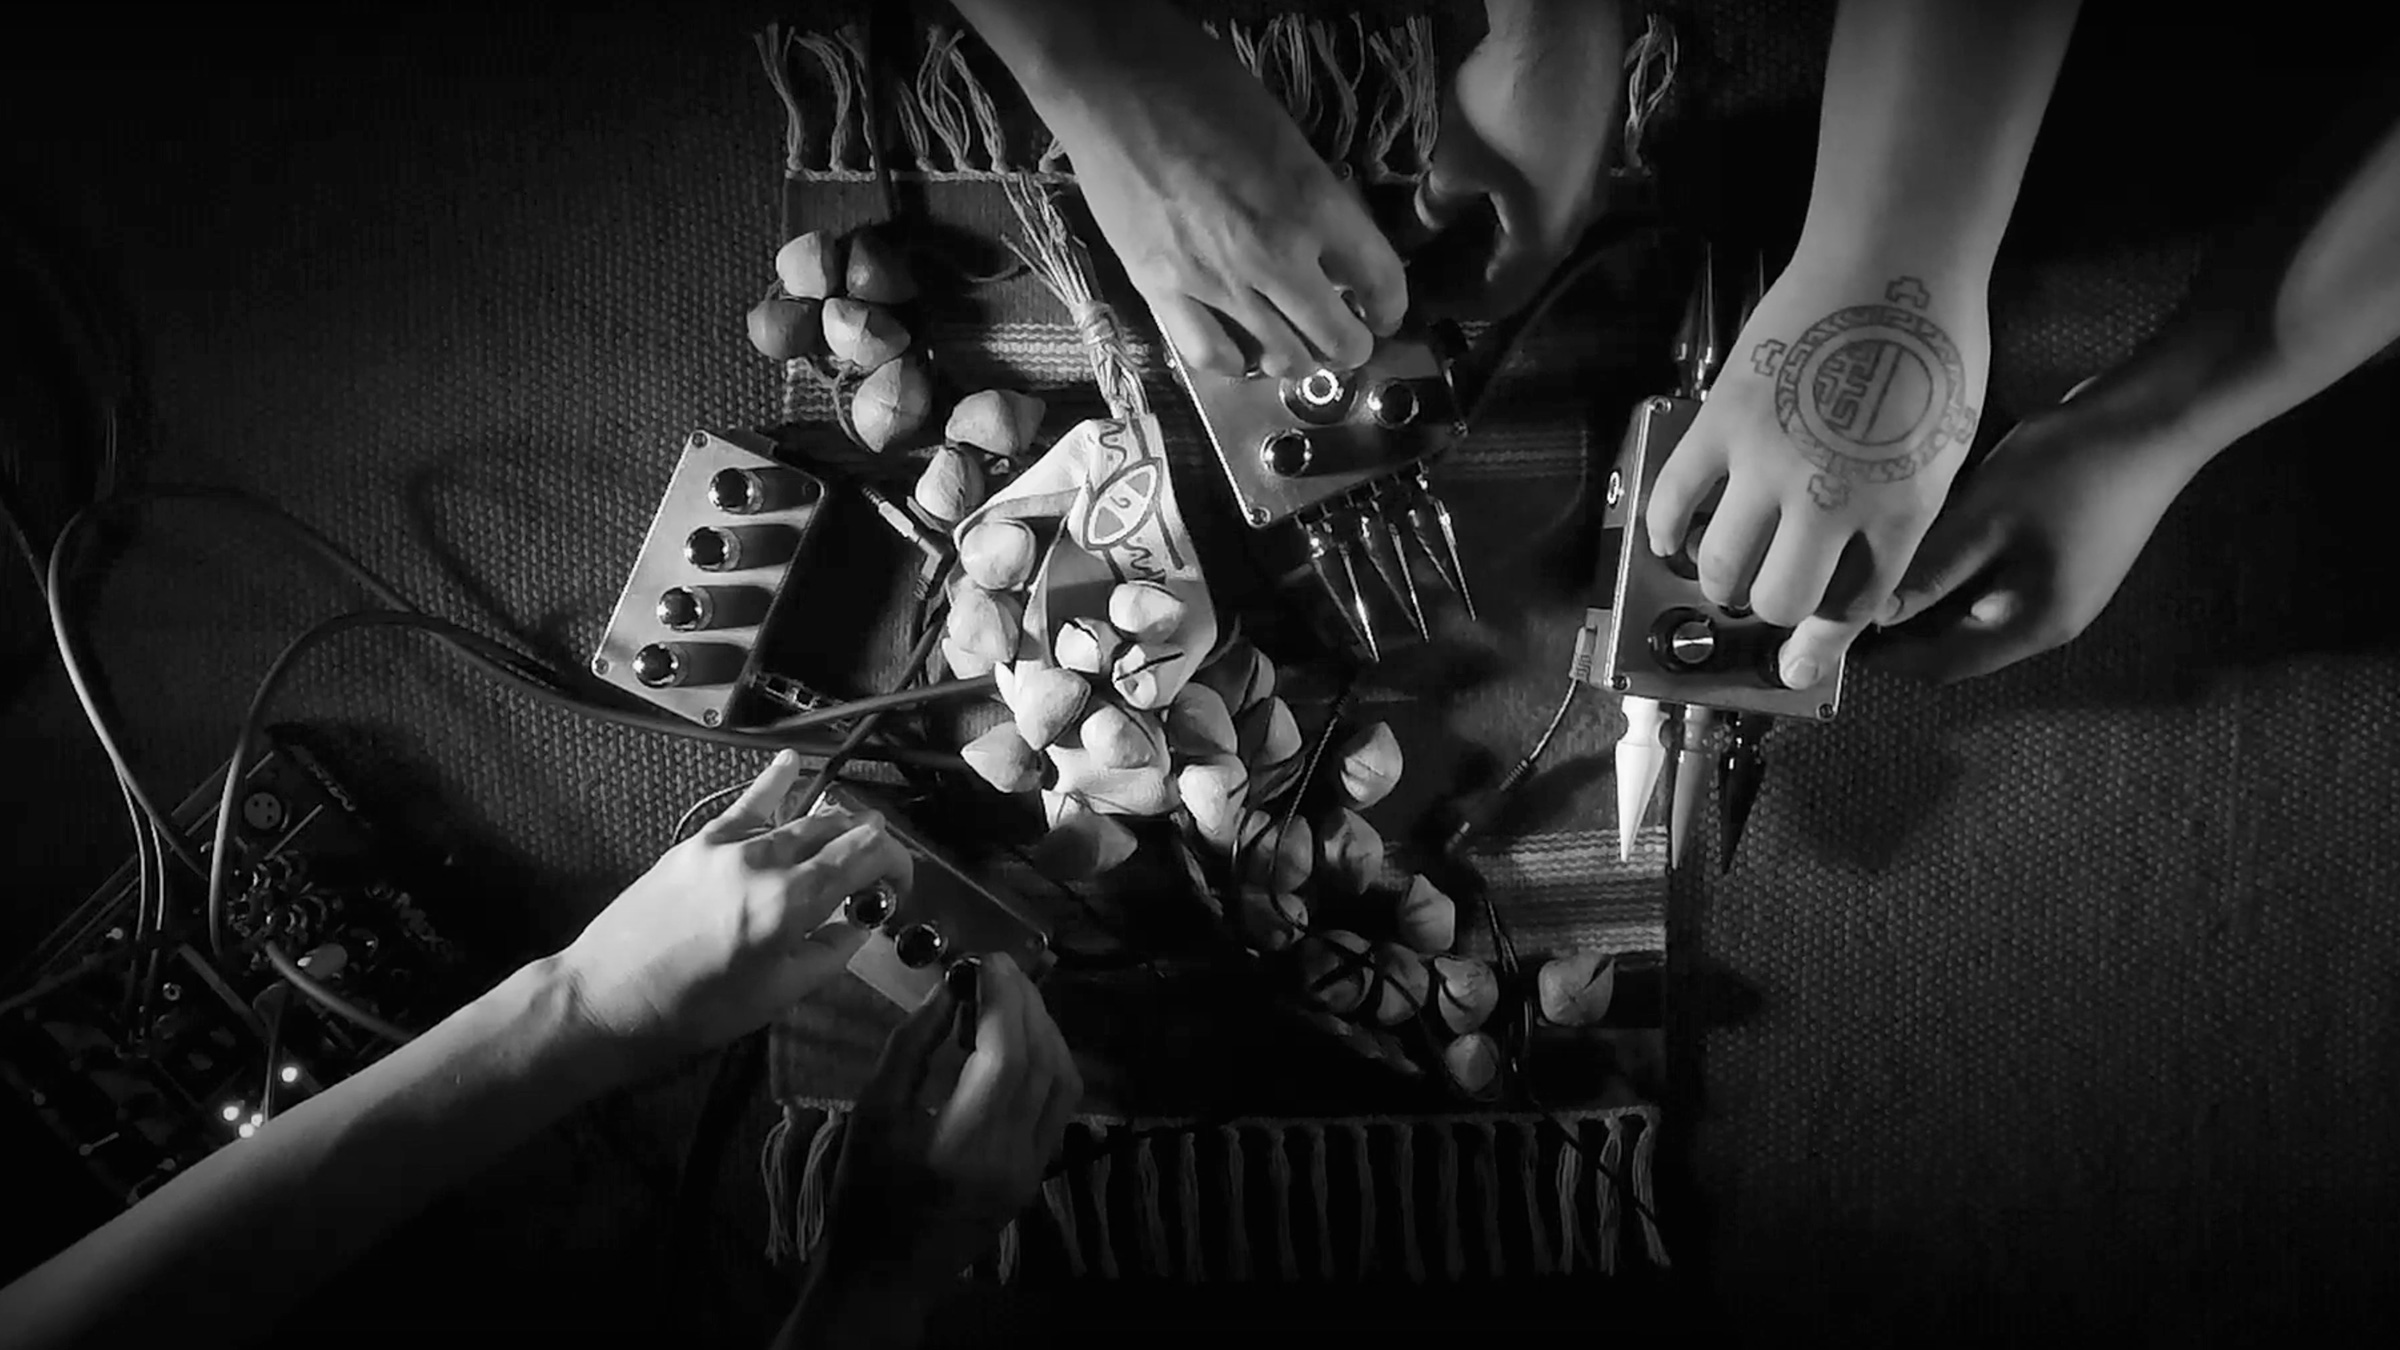 This black-and-white photographic image is a still from a video. It is a top-down view of three pairs of hands playing four electronic instruments. The instruments are boxes with dials and spikes, and they are positioned on top of a small, woven rug with ayoyote rattles in the center.